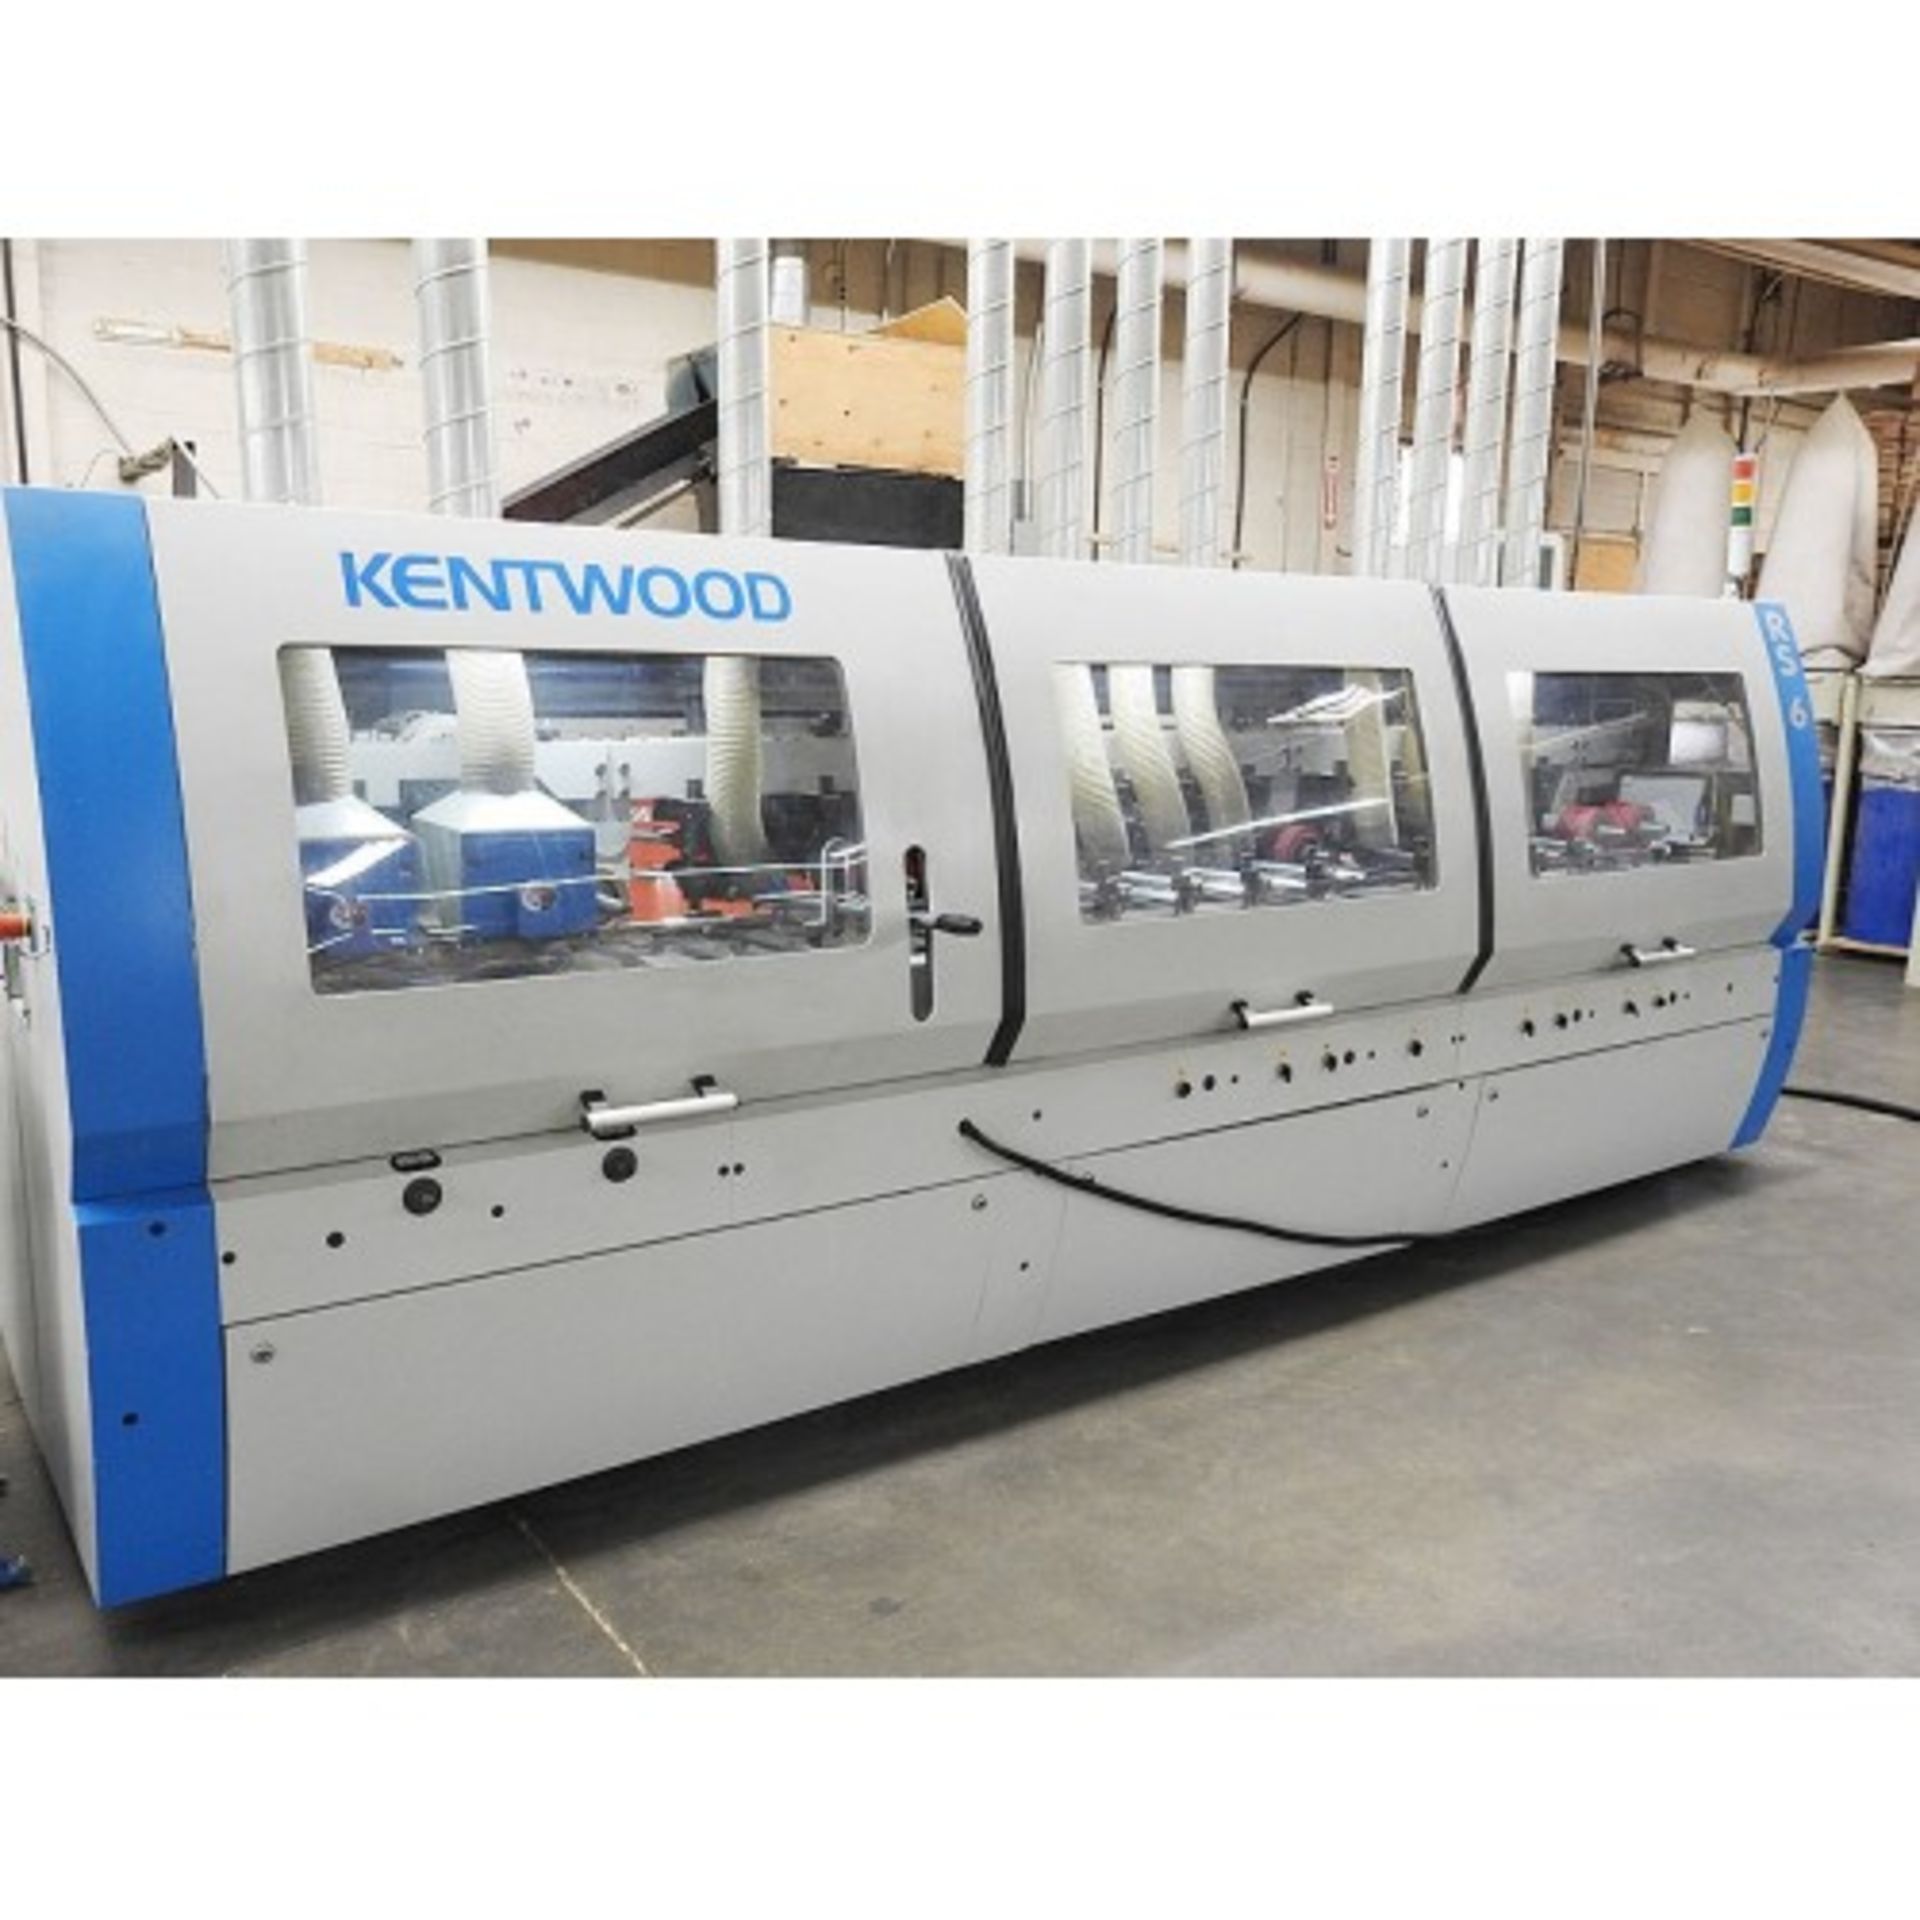 2014 Kentwood RS-6 Randomizer Automated Scraping Floor Machine